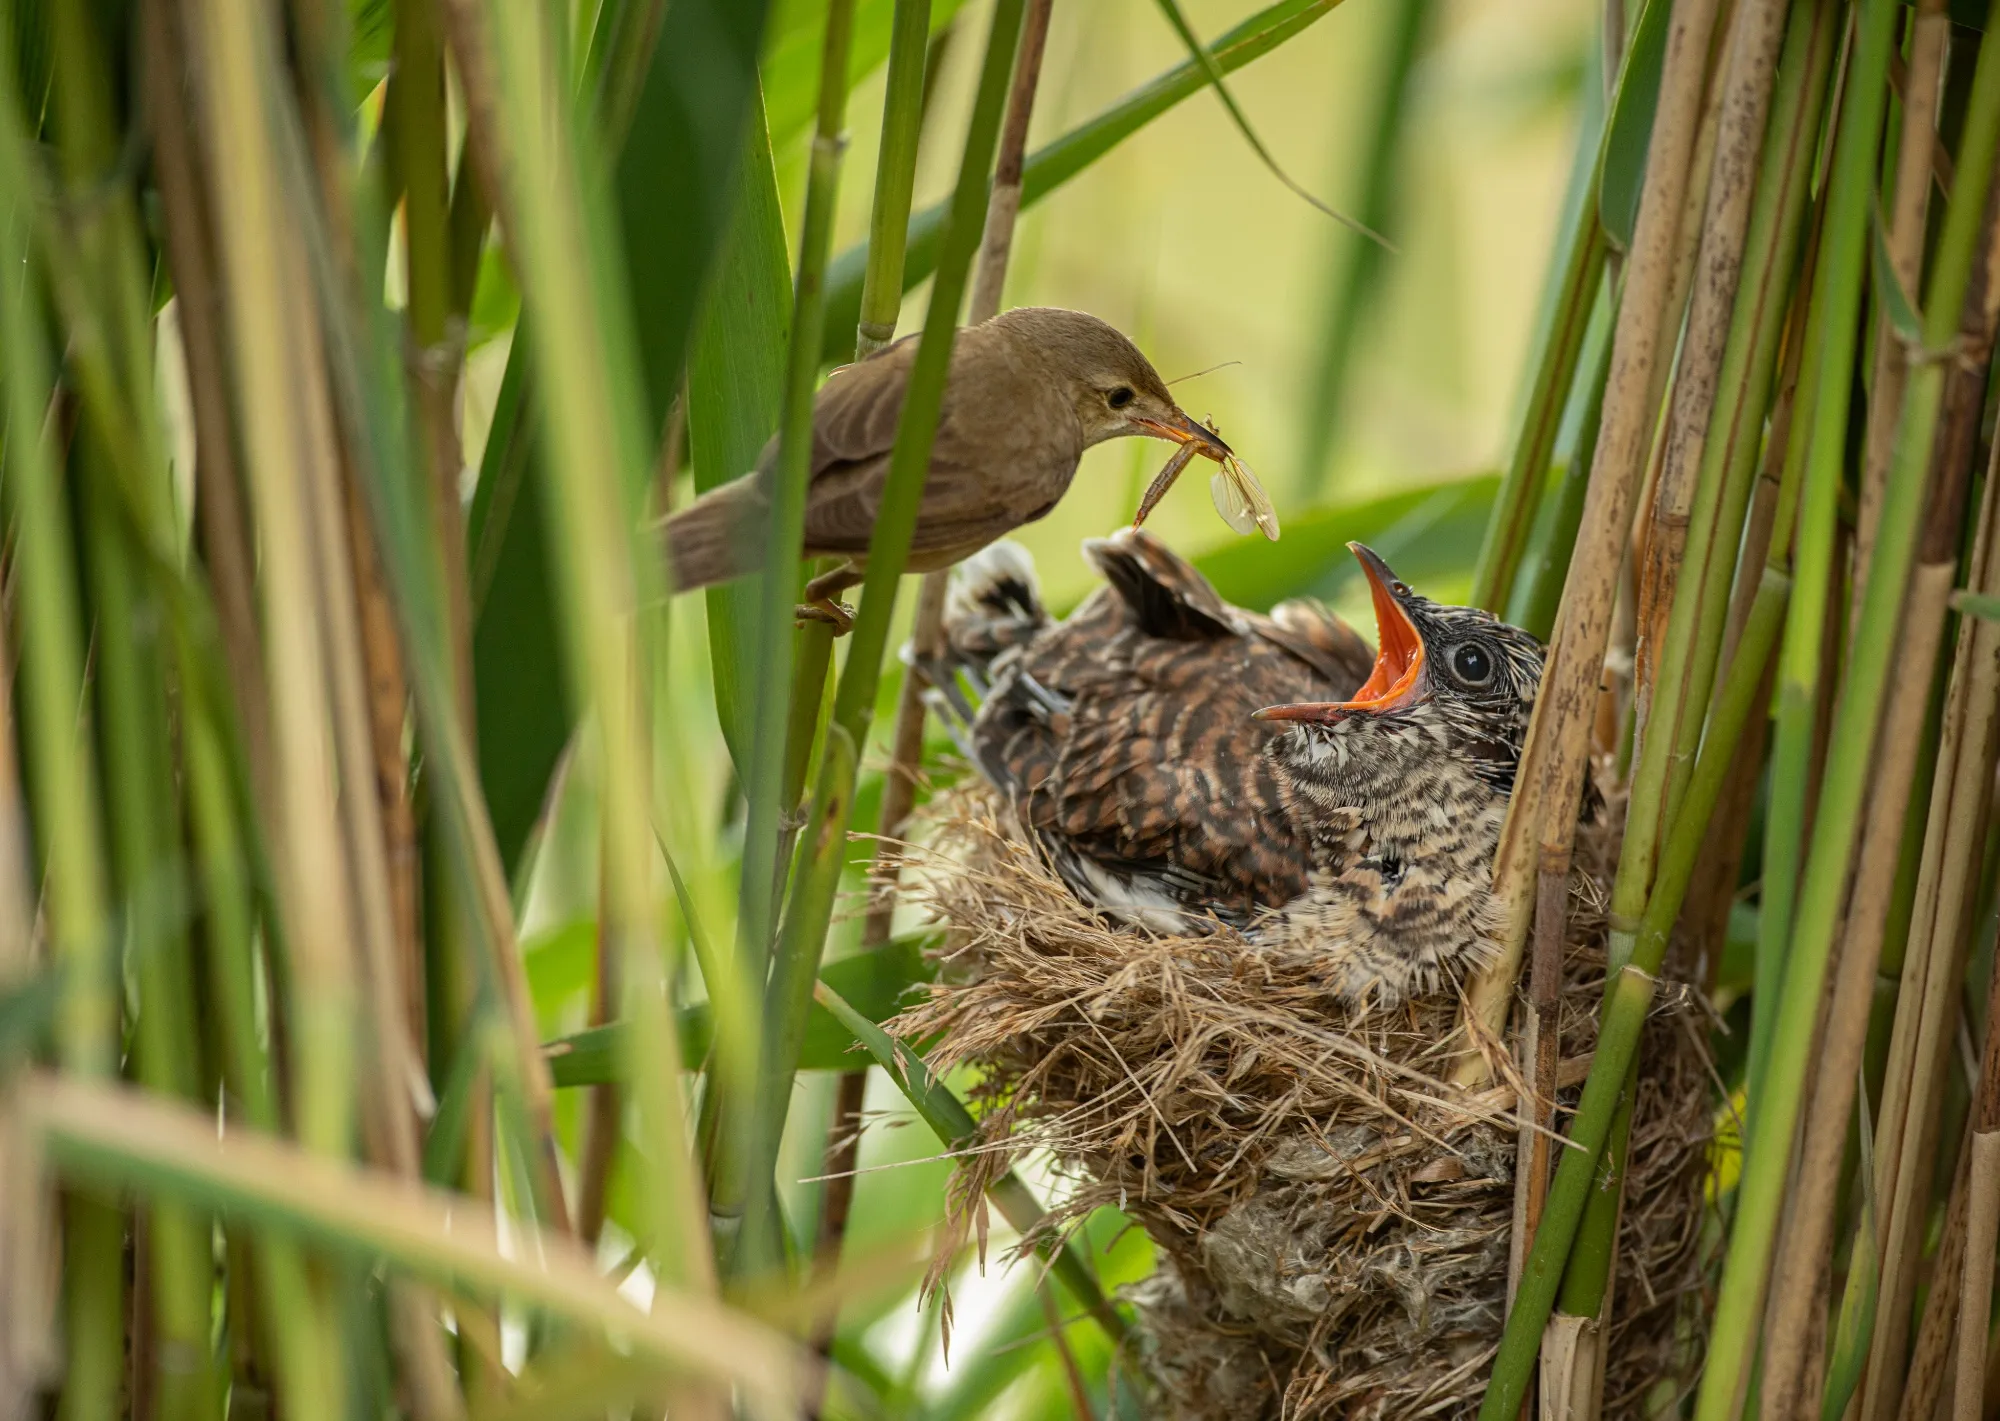 A young Cuckoo in a Reed Warbler’s nest, being fed by an adult Reed Warbler